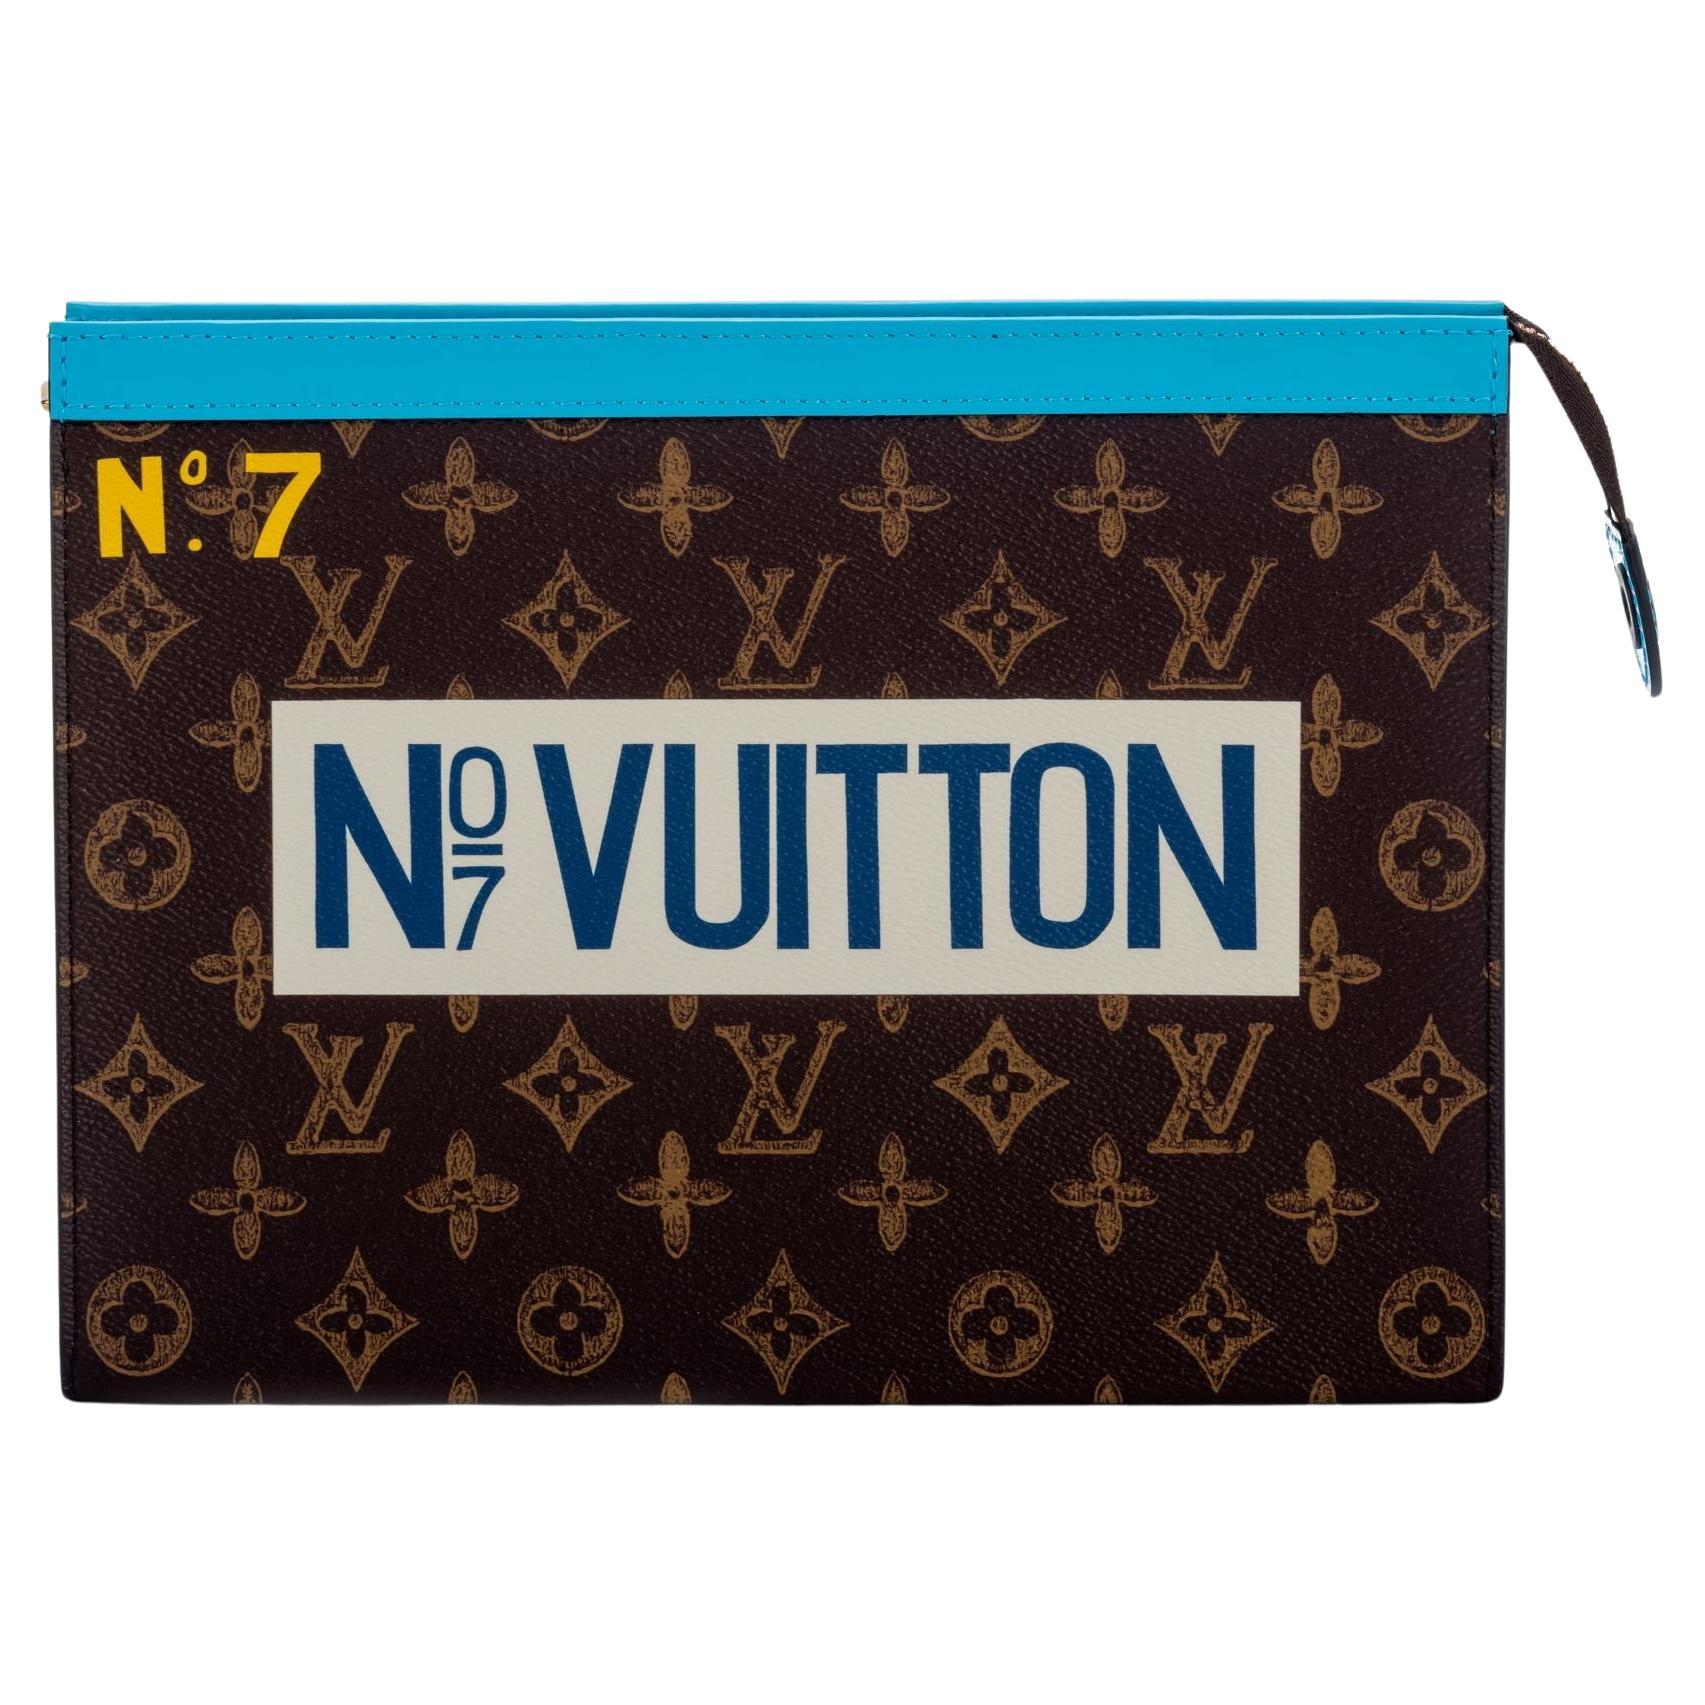 Brand New/Sold Out /Virgil Abloh/Louis Vuitton Orange Pouch in Orange  canvas at 1stDibs